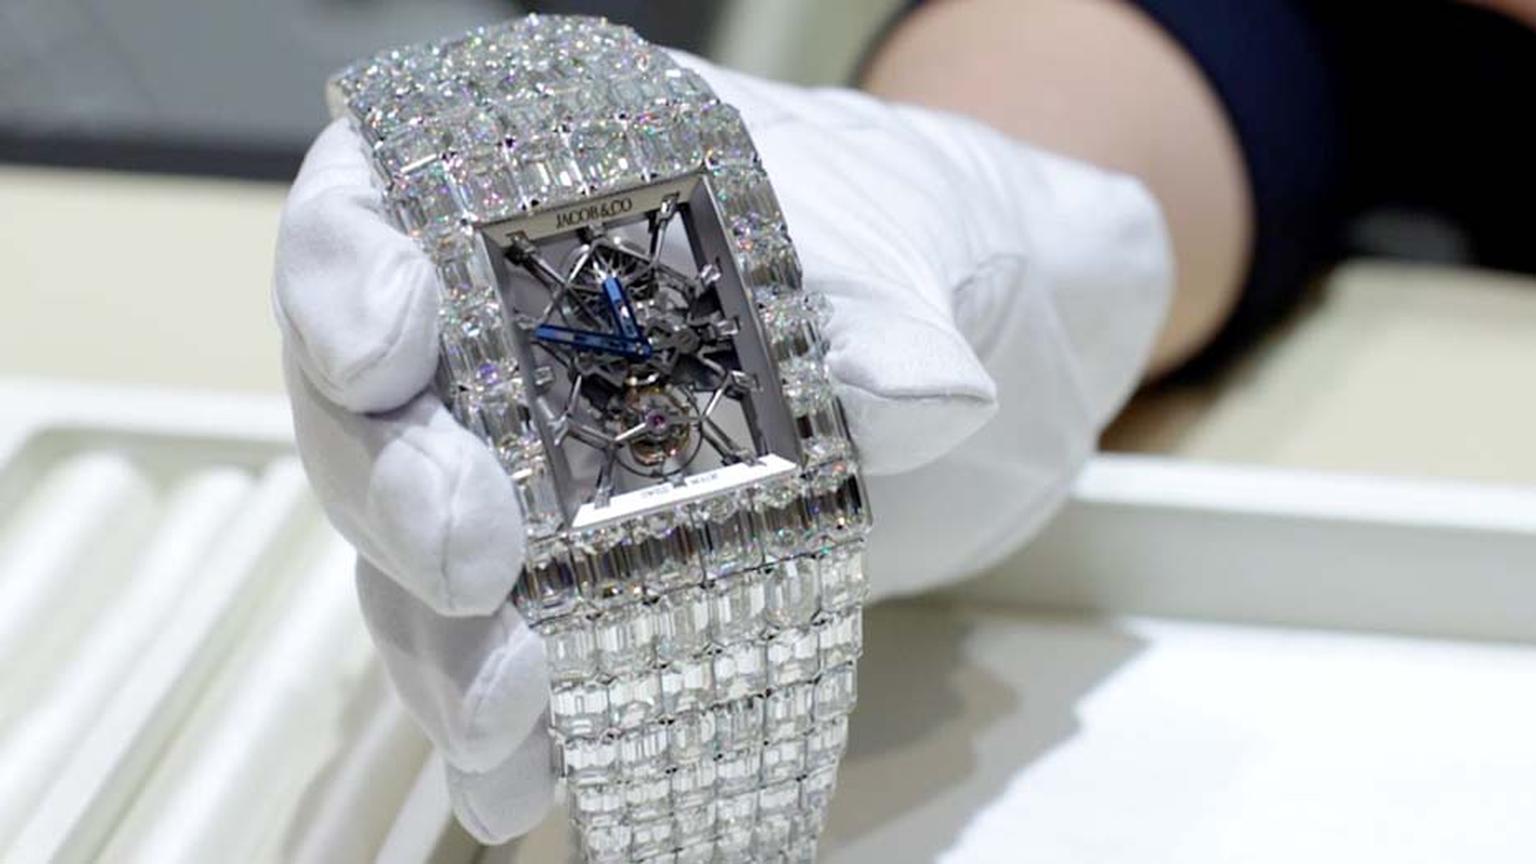 The Jacob & Co. Billionaire watch, with its spectacular skeletonised dial and 260ct of emerald-cut diamonds, is a watch for connoisseurs with a streak of exhibitionism.